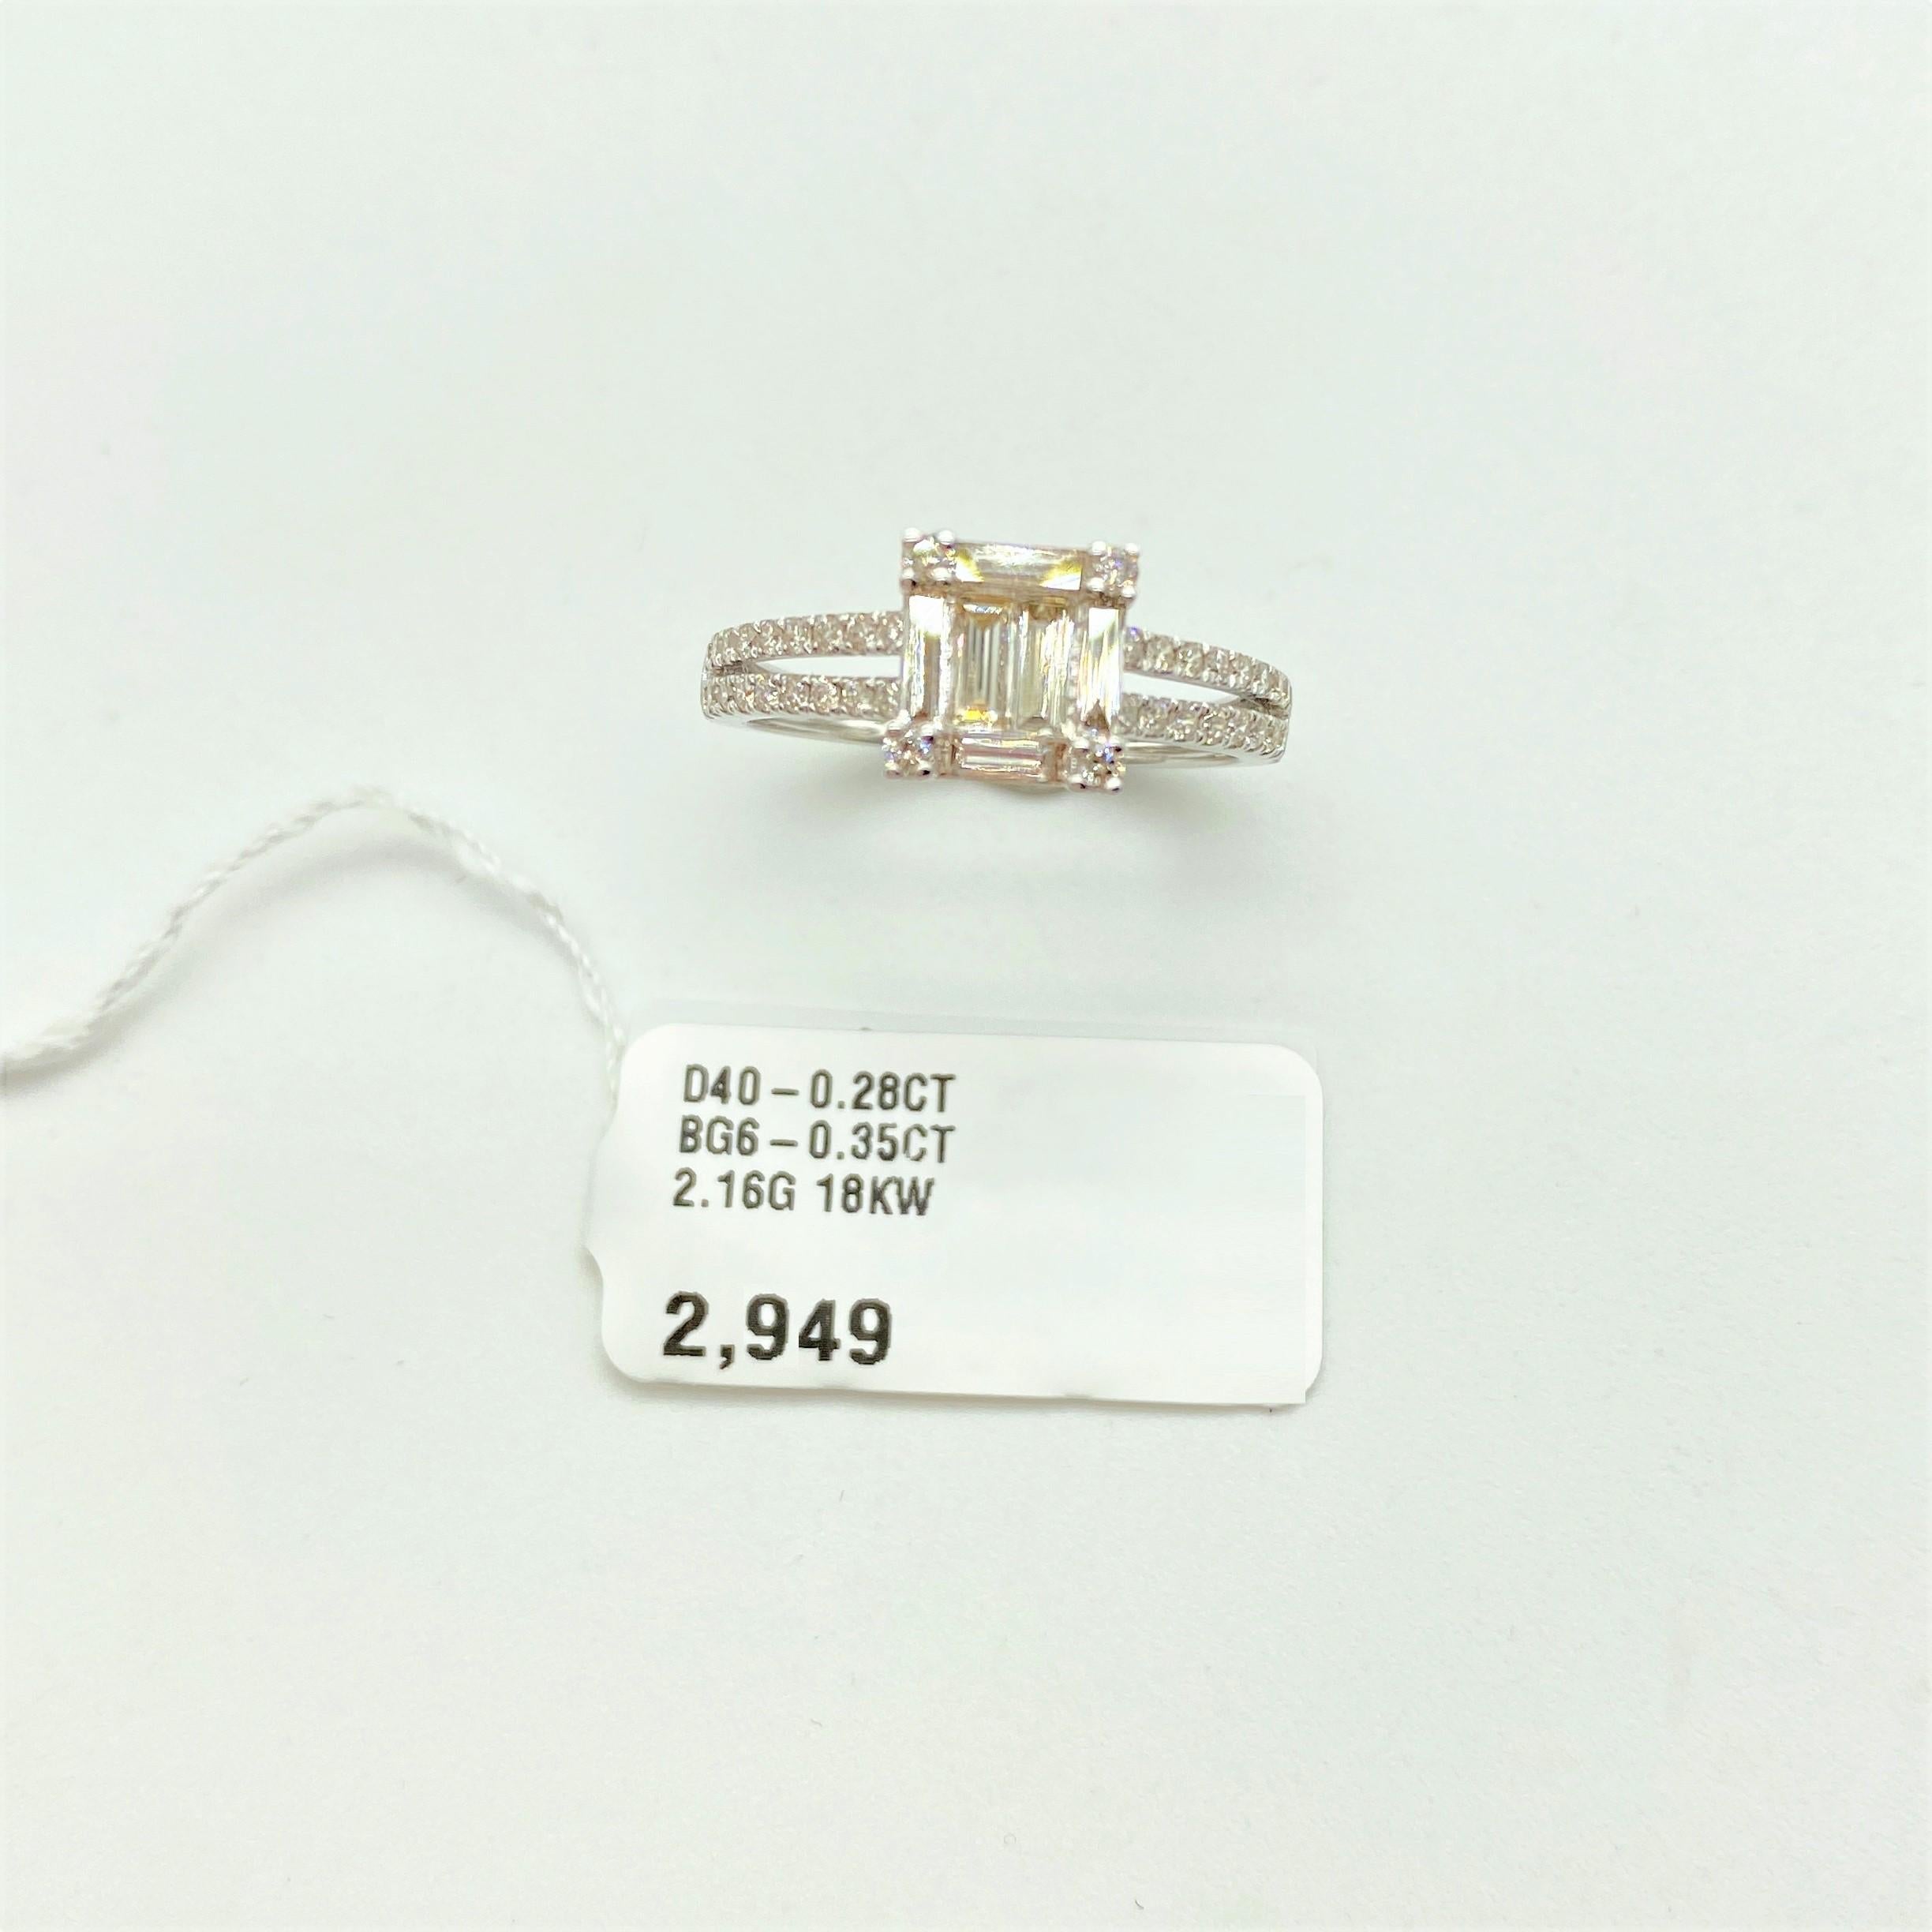 Mixed Cut NWT $2, 949 18KT Gold Glittering Fancy Baguette Diamond Engagement Statement Ring For Sale